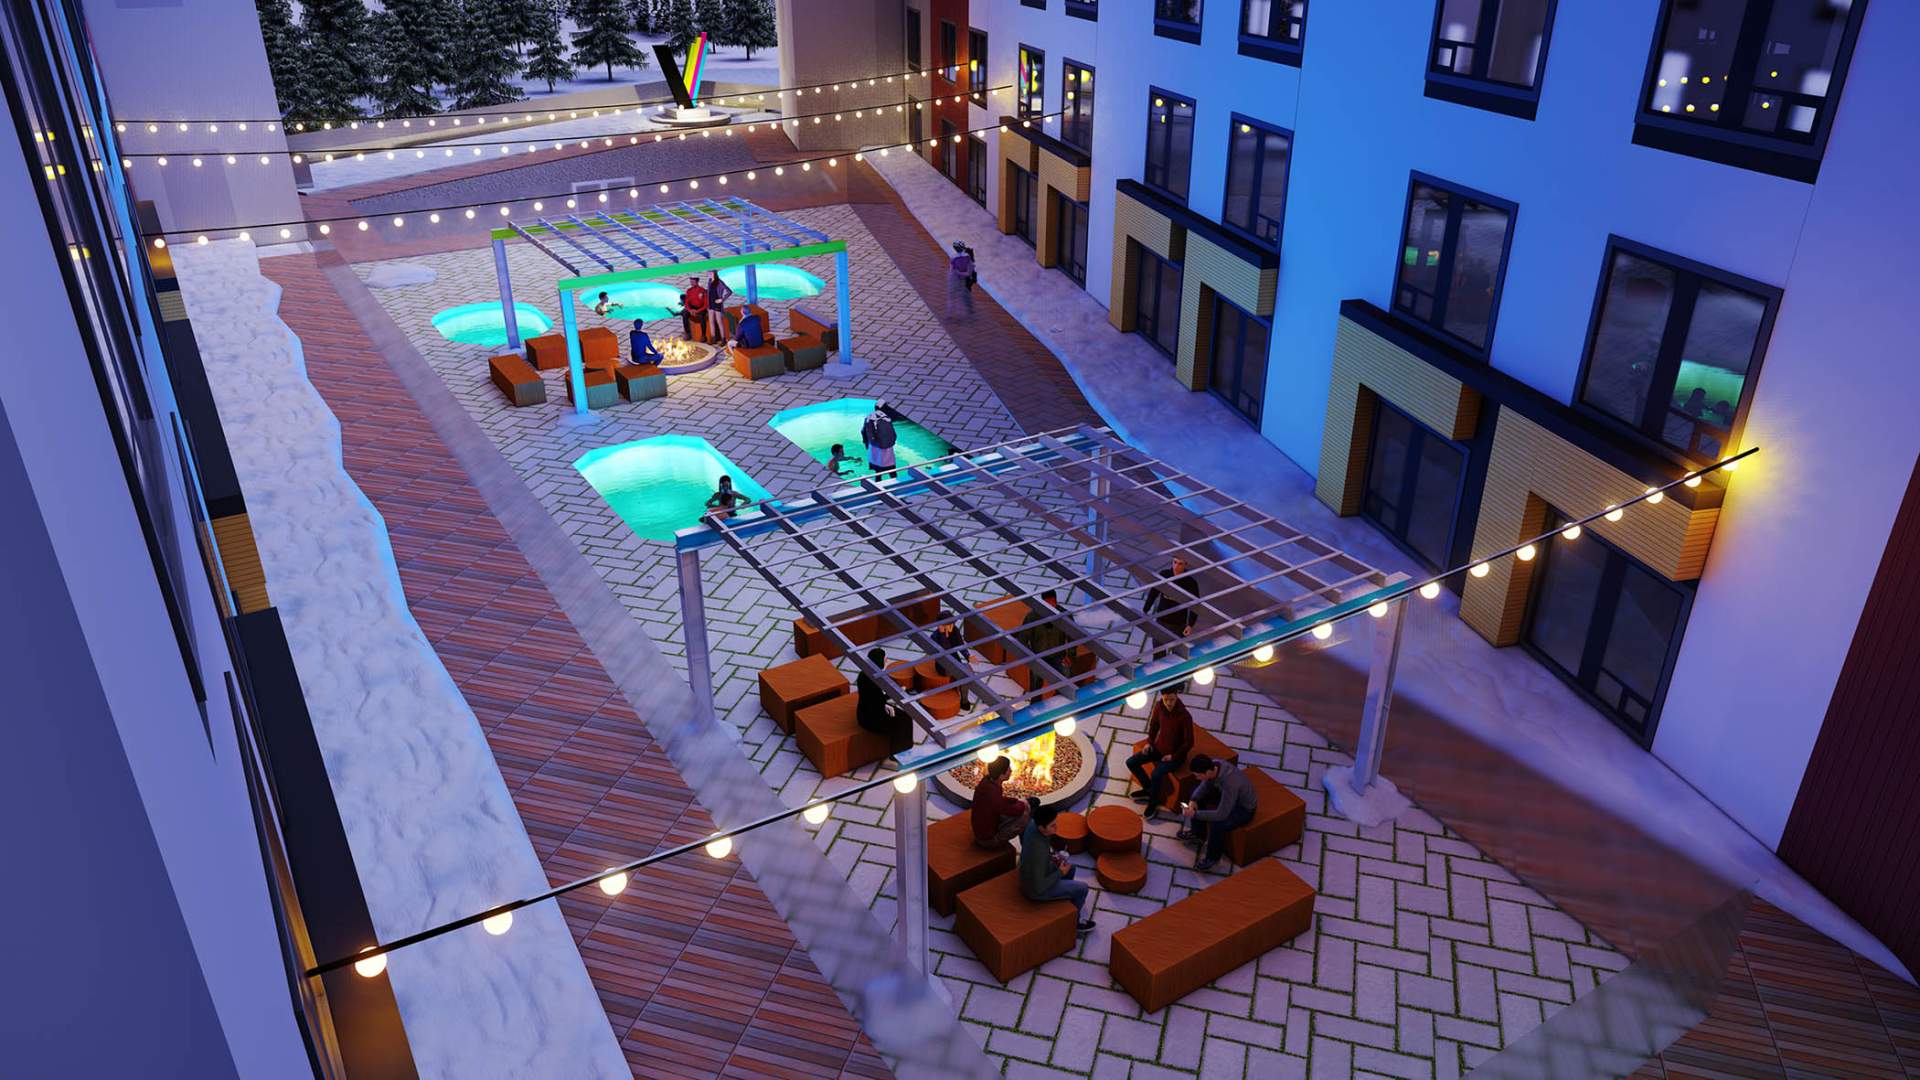 Podium courtyard offers residents a place to socialize with hot tubs and fire pits.